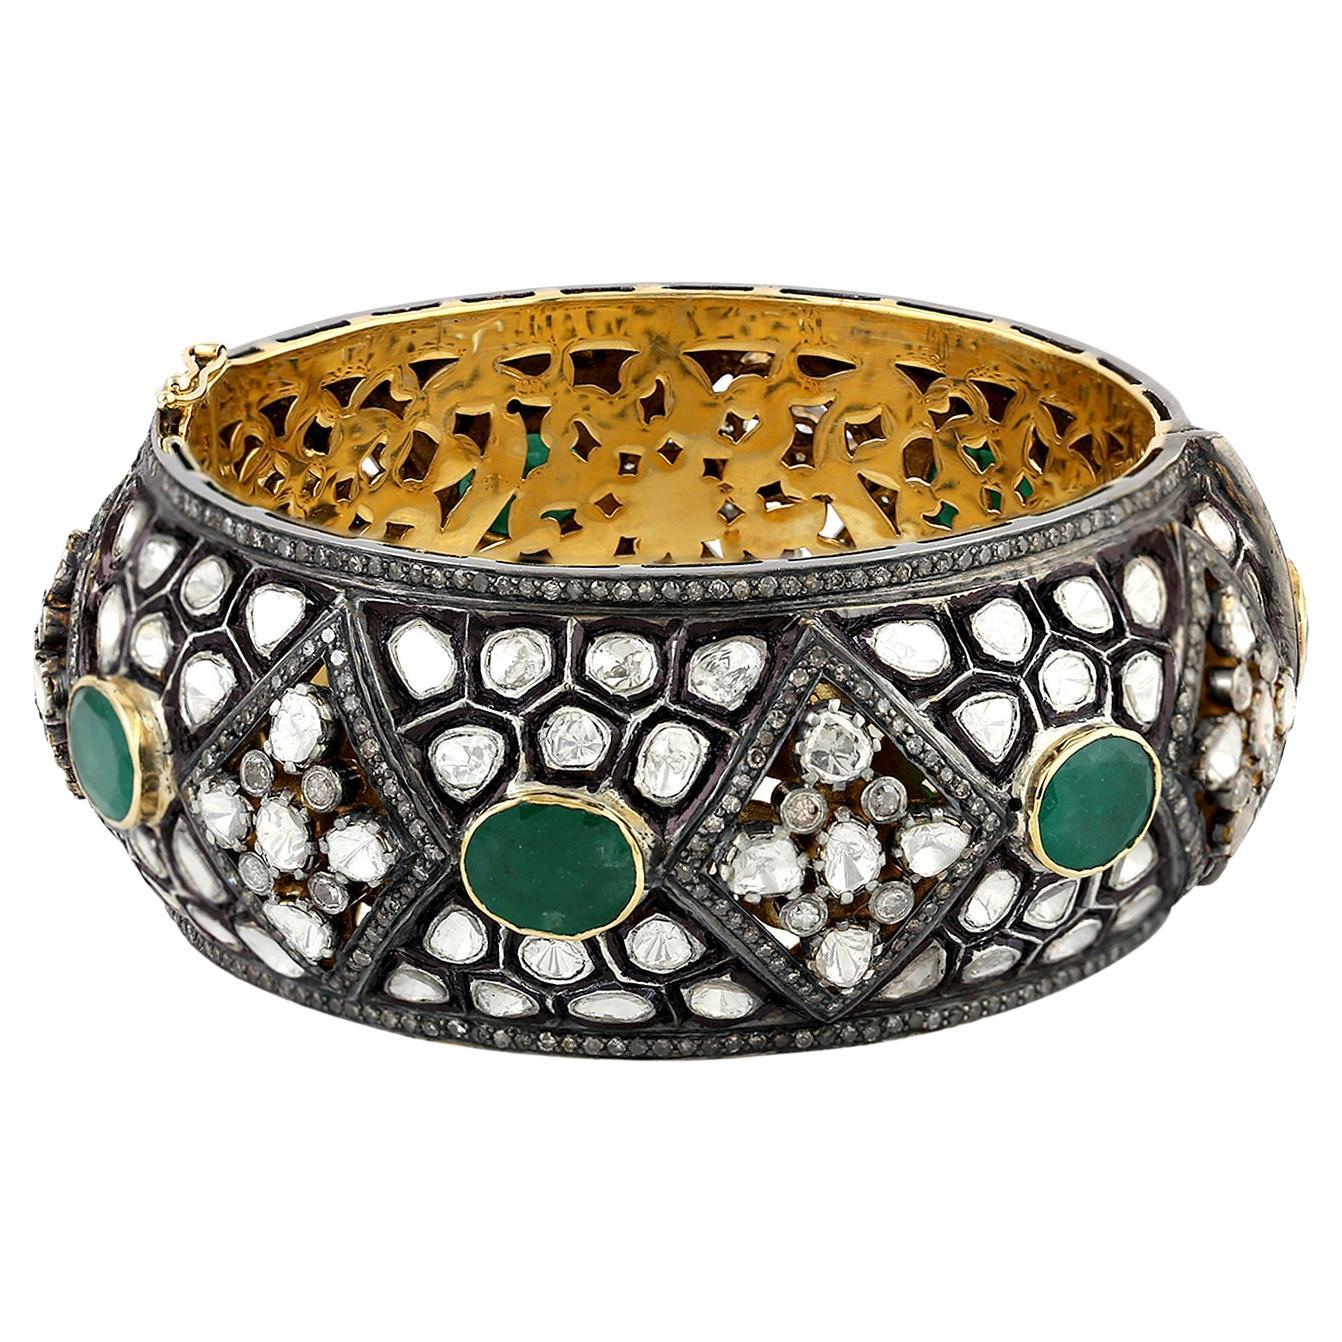 Emerald & Rose Cut Diamonds Bangle with Carved Grill Made in 14k Gold & Silver